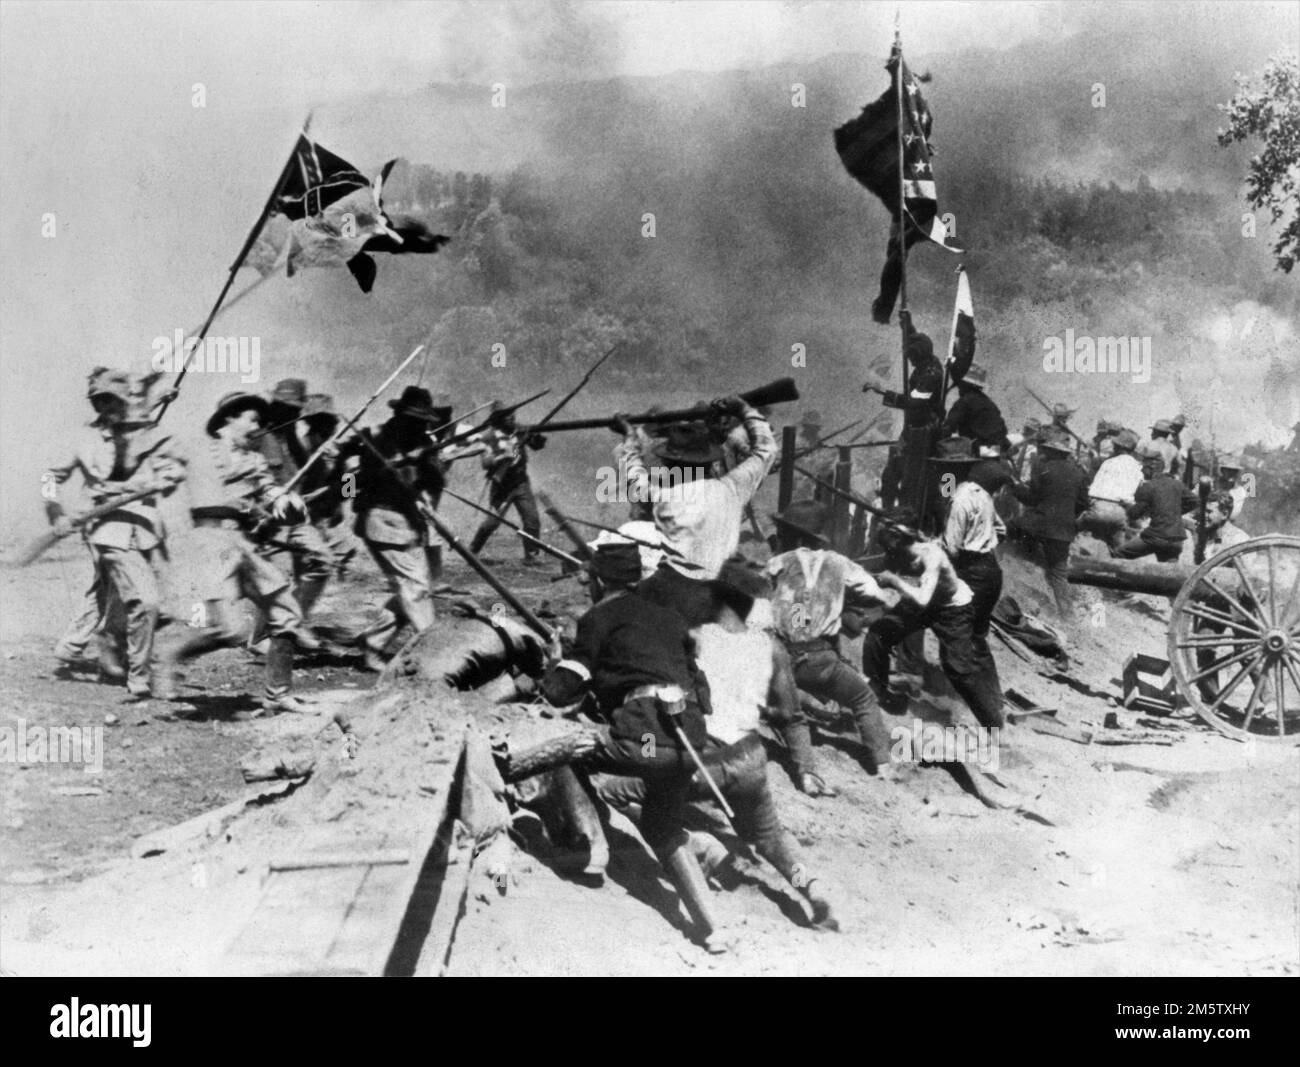 Battle Scene with HENRY B. WALTHALL as the Little Colonel in THE BIRTH OF A NATION 1915 director D.W. GRIFFITH novel / play Thomas Dixon Jr. David W. Griffith Corp. / Epoch Producing Corporation Stock Photo